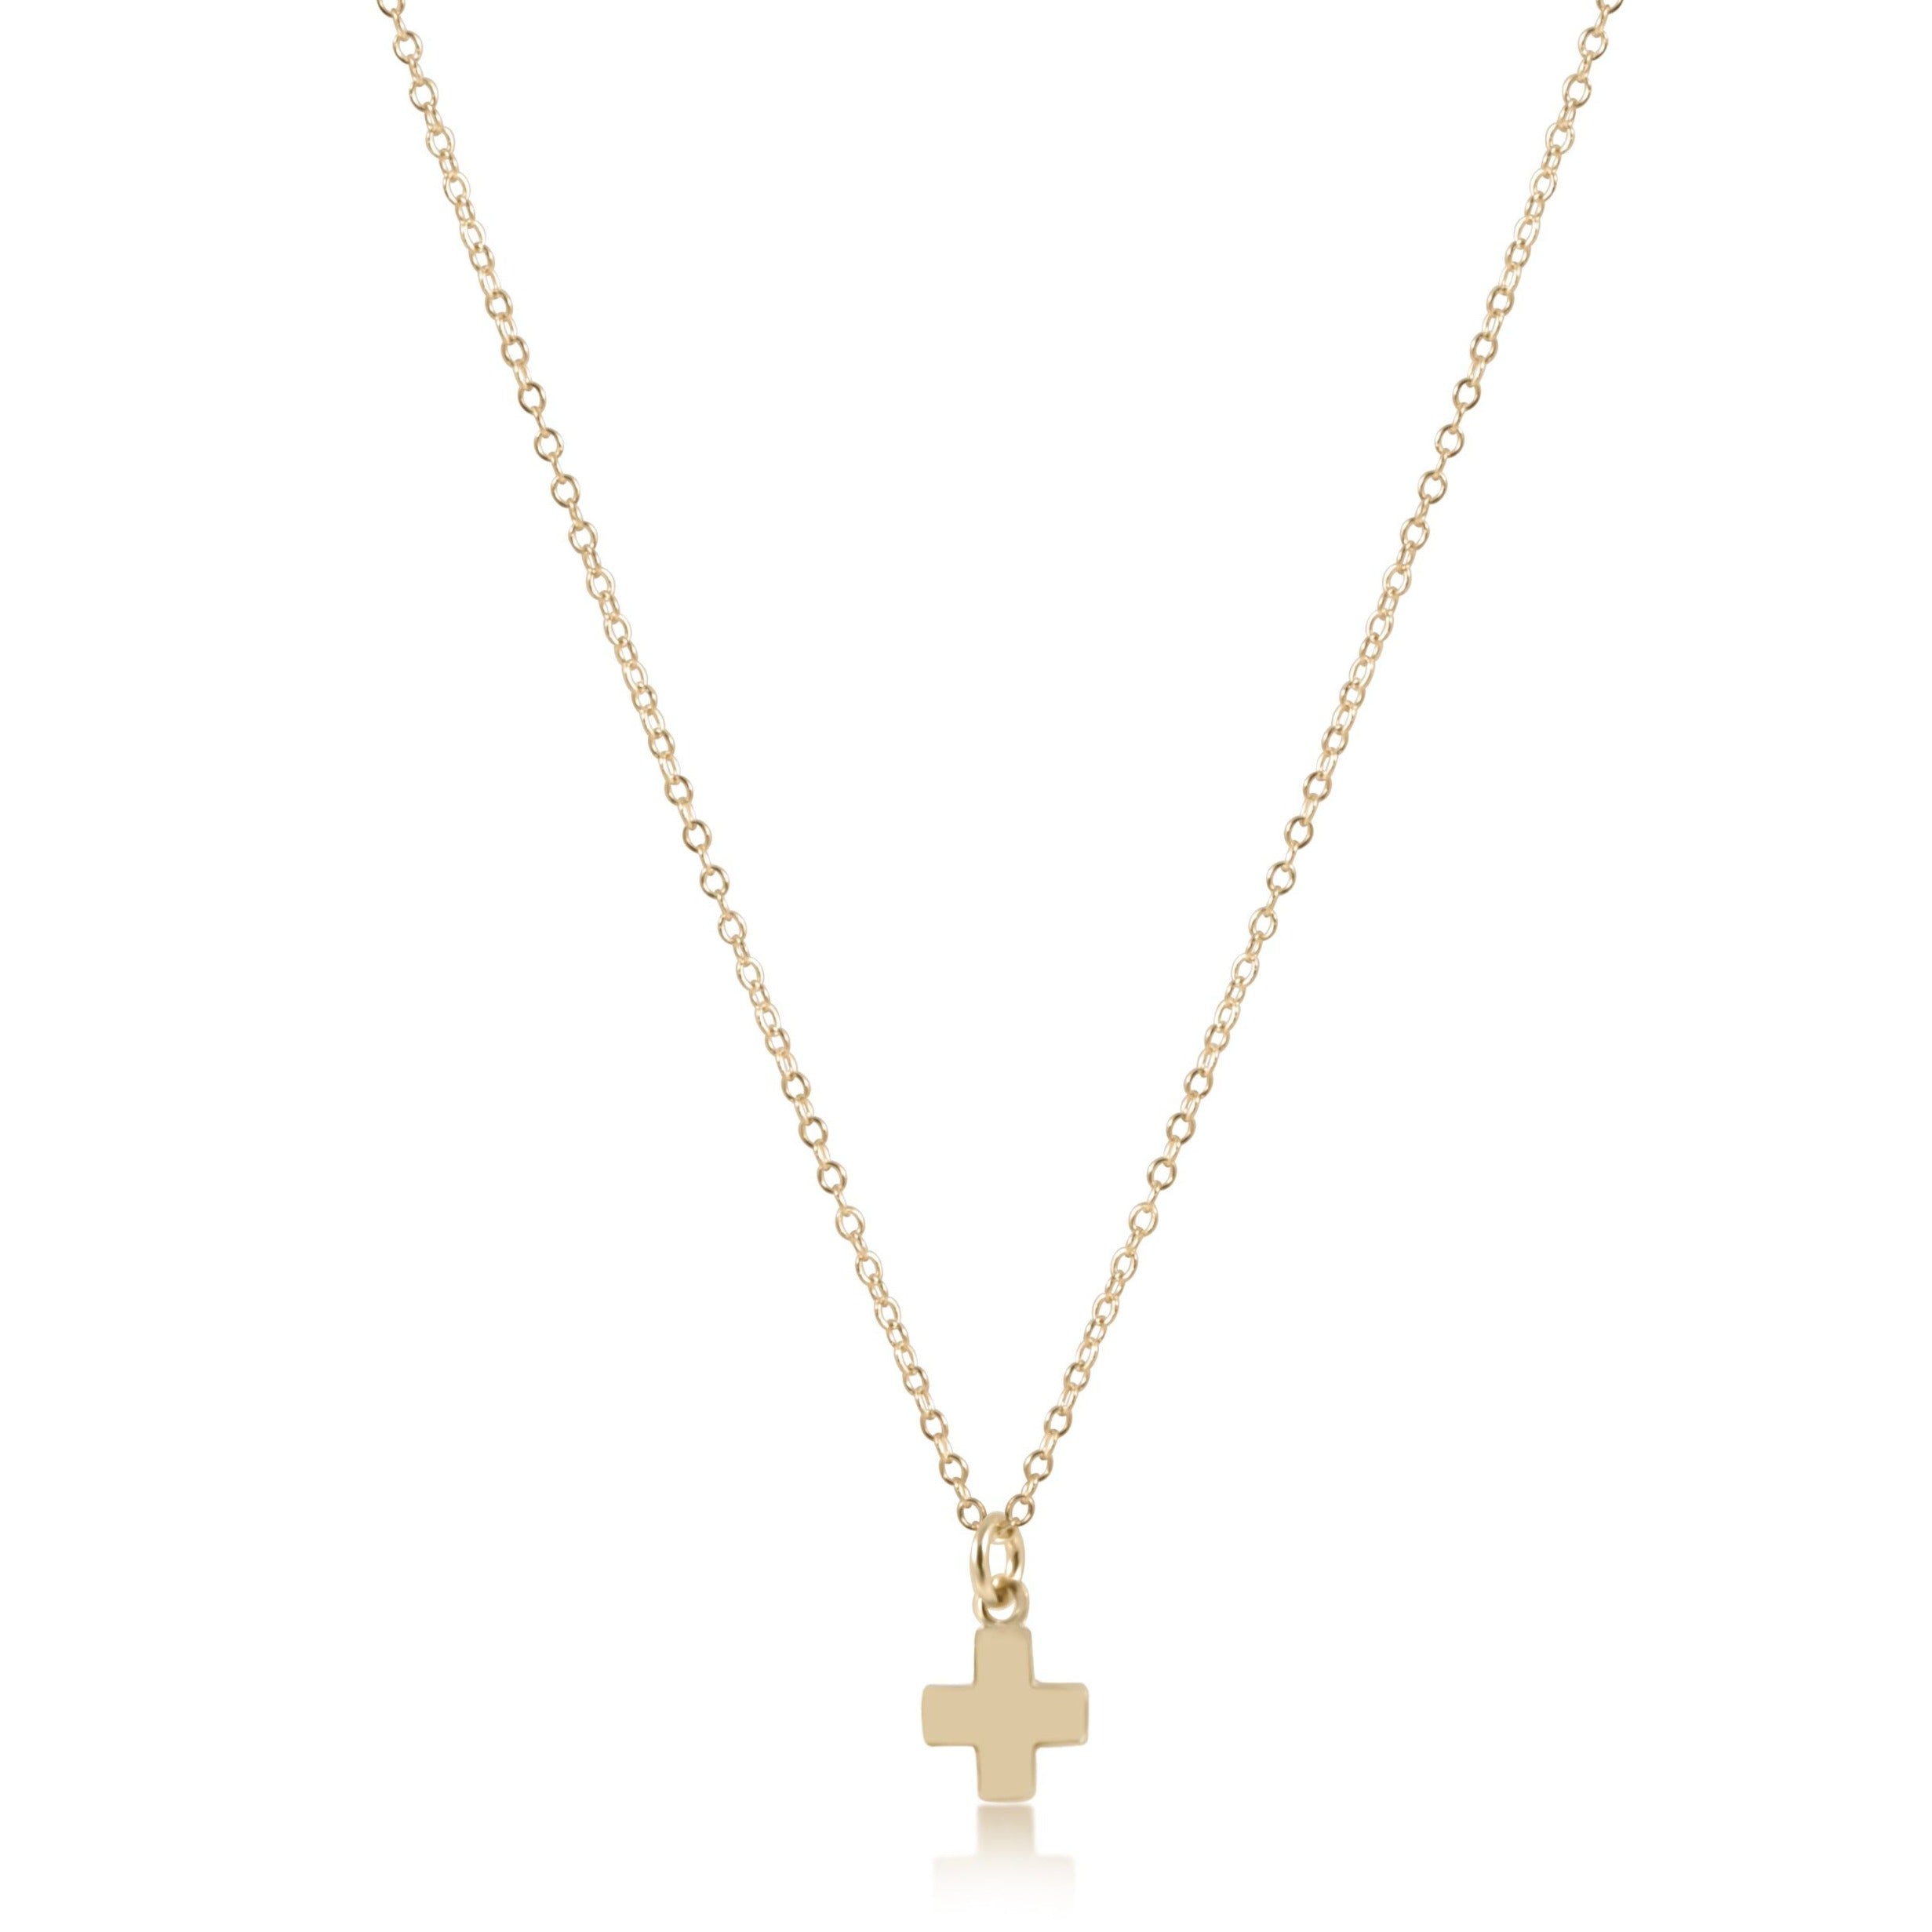 Small 14K Rose Gold Cross Necklace for Women with Hidden Bale